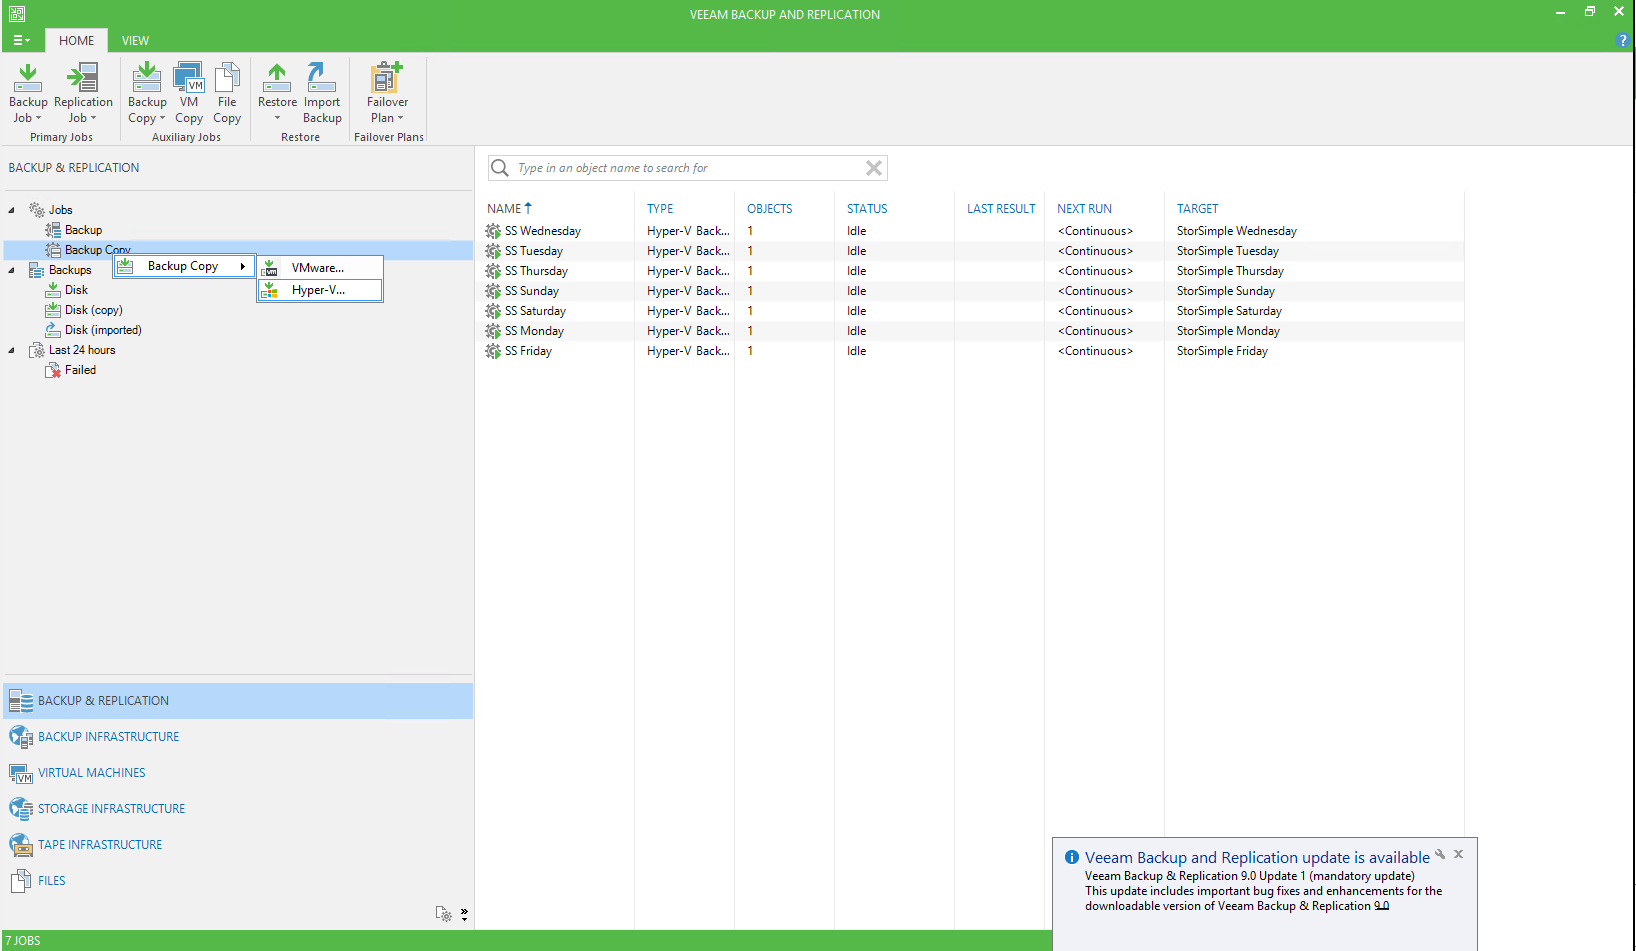 Screenshot that shows the Veeam management console with the VMware and Hyper-V options that you can select.